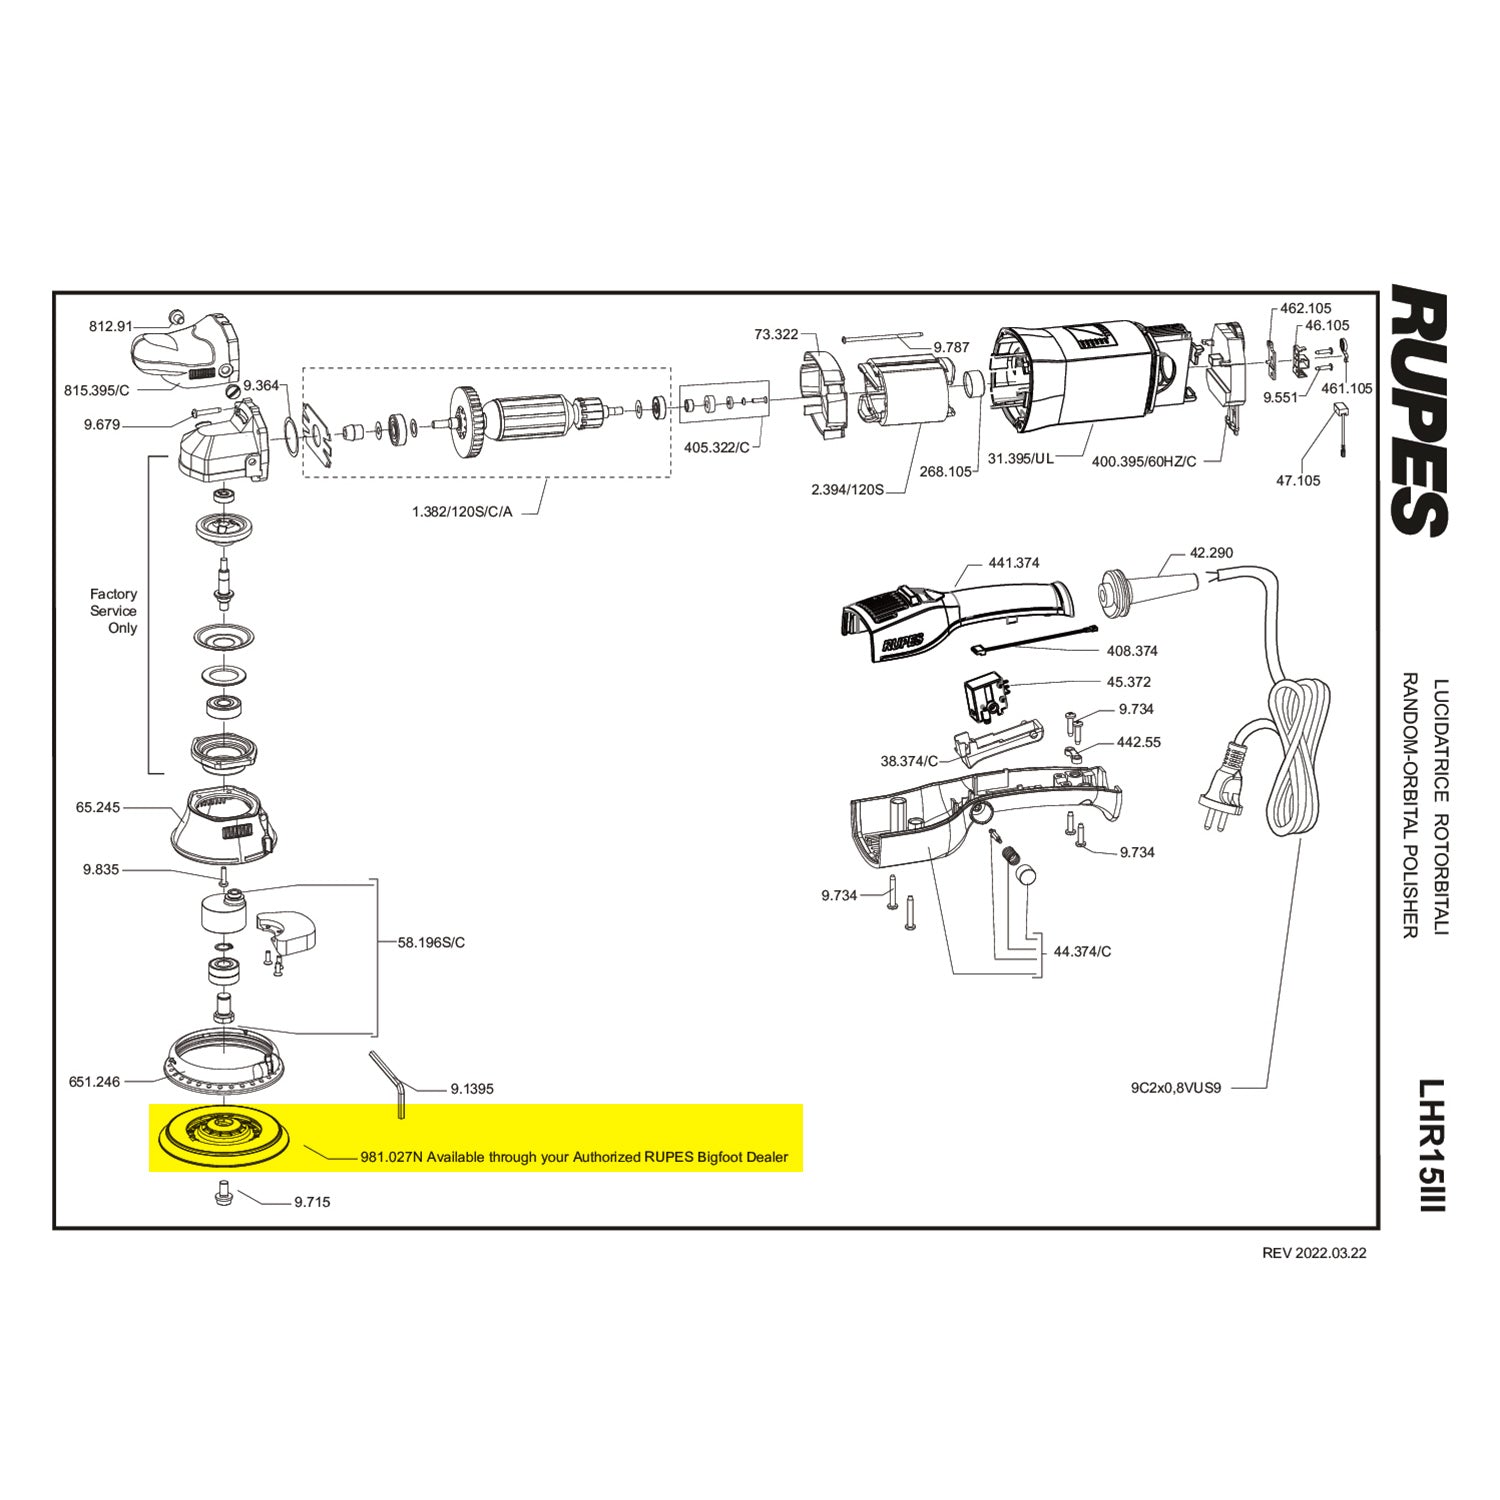 lhr15-mark-3-backing-plate-parts-guide